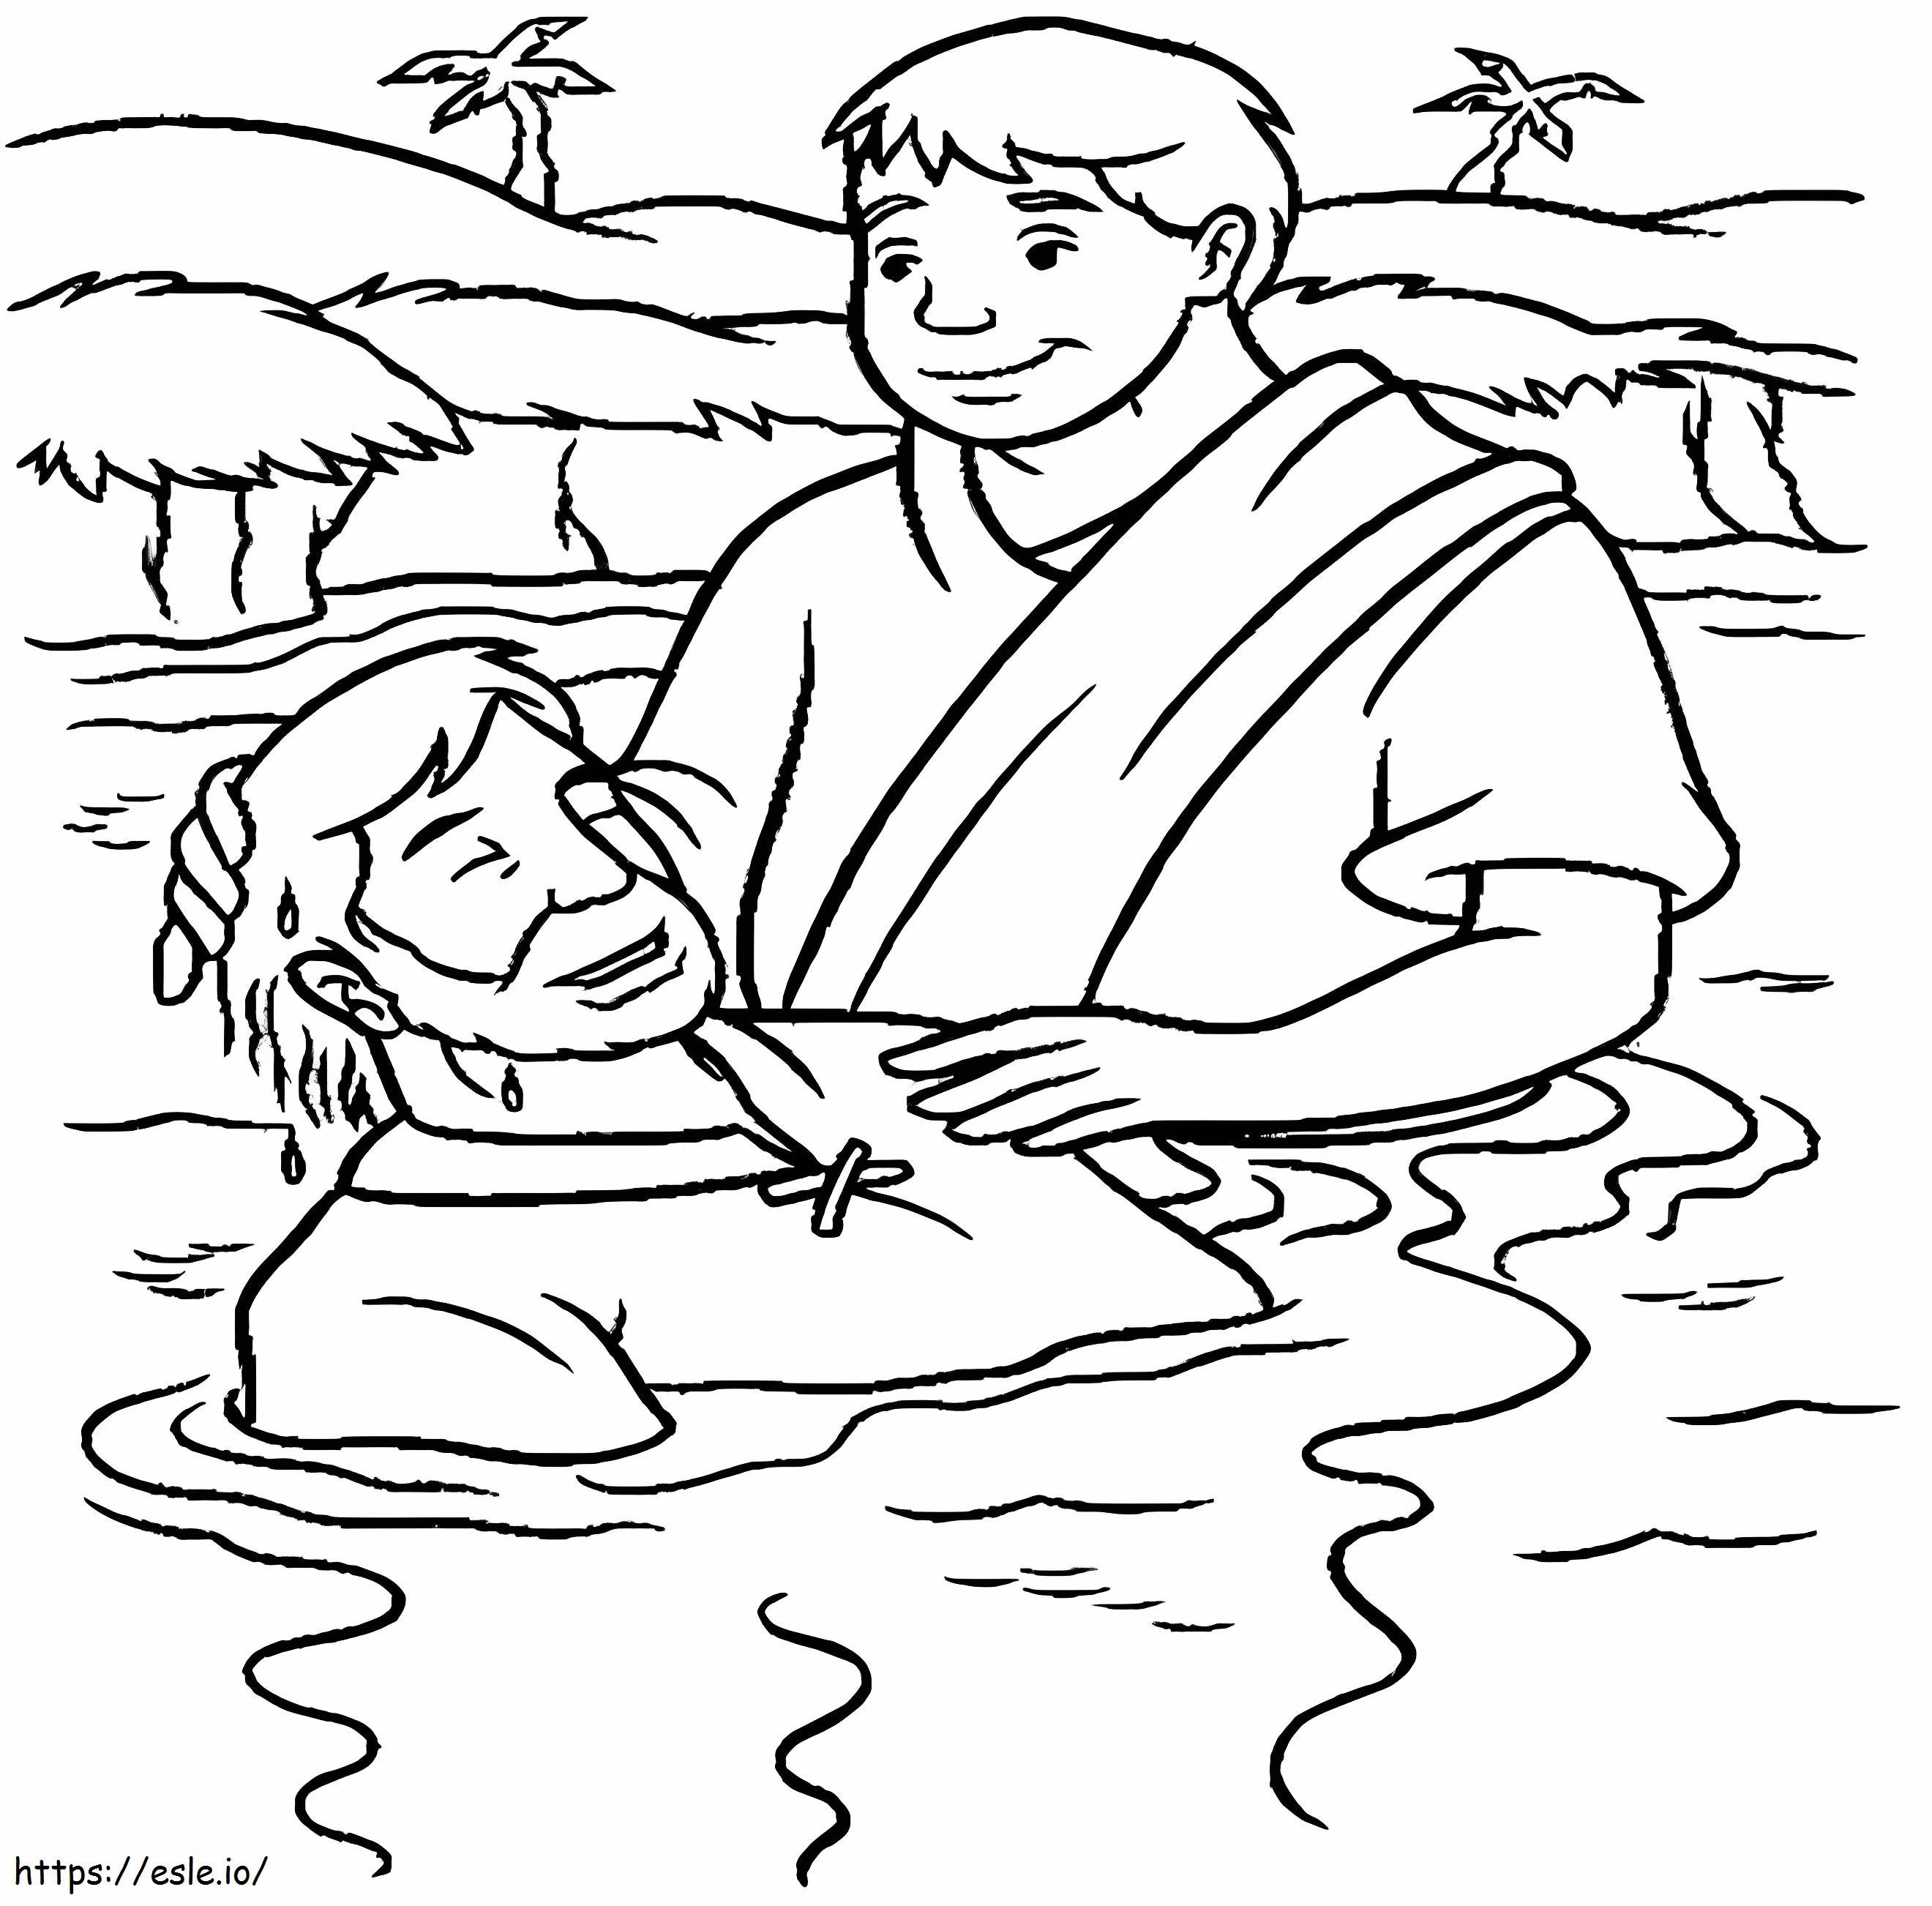 John The Baptist coloring page